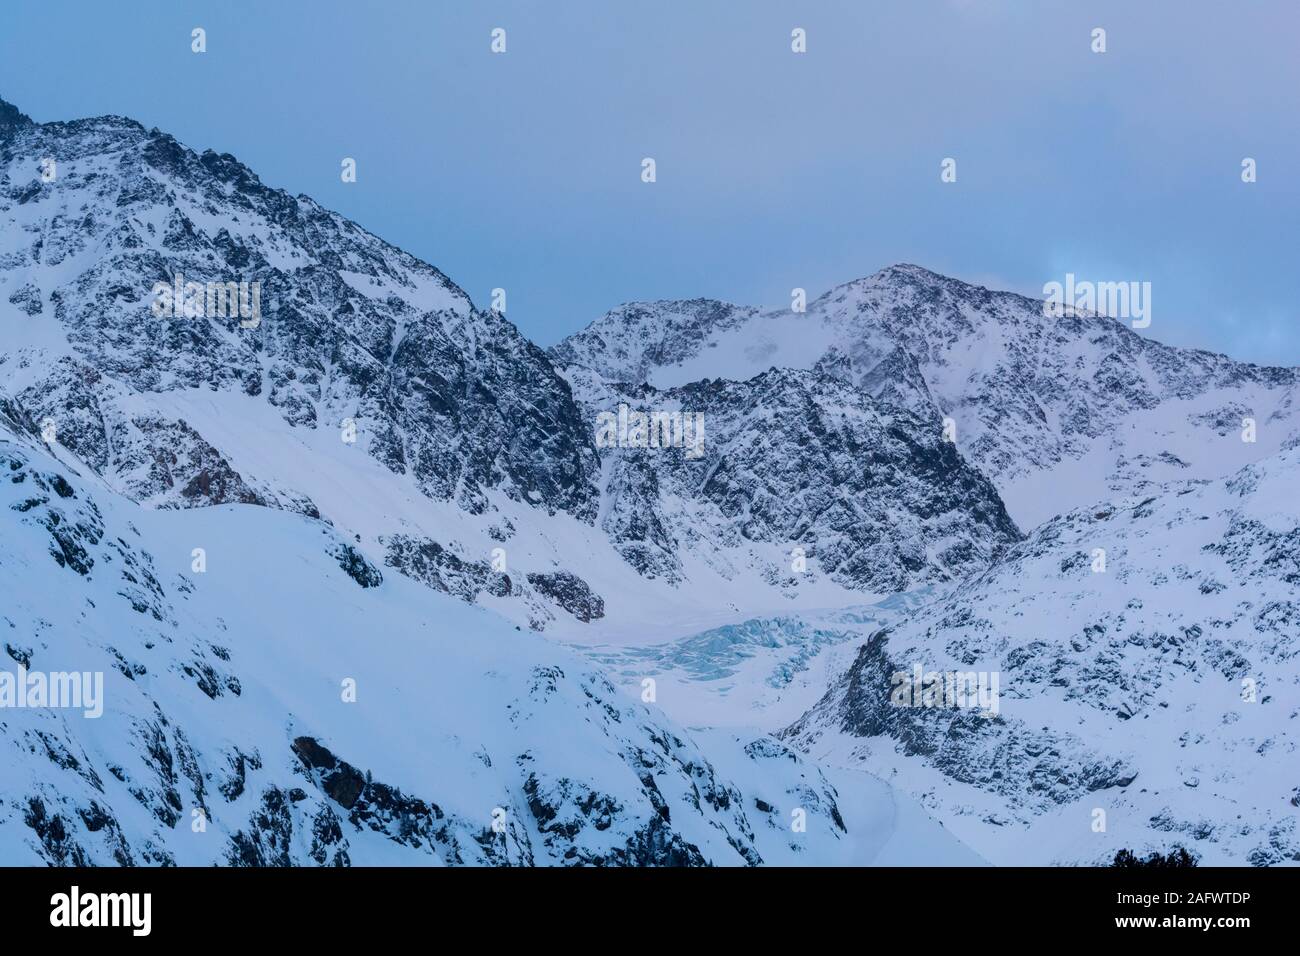 View over the Kaunertal glacier, with its beautiful turquoise color. Landscape in Kaunertal, Tyrol, in the Austrian Alps. After Sunset. Stock Photo